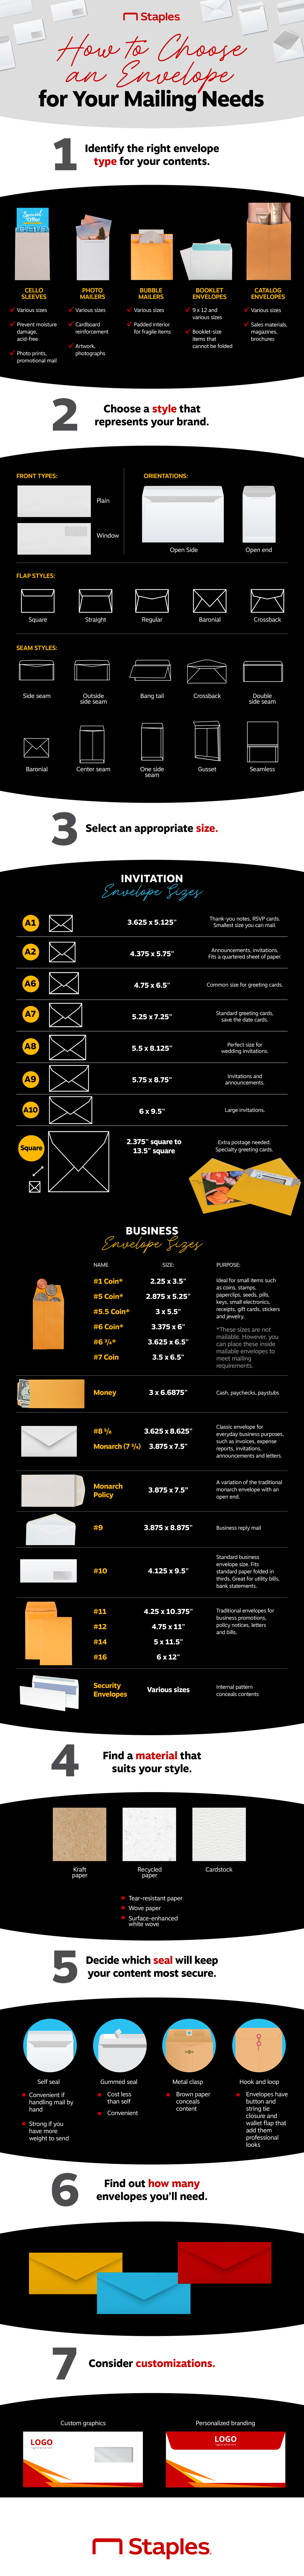 How to Choose an Envelope for your Mailing Needs Infographic